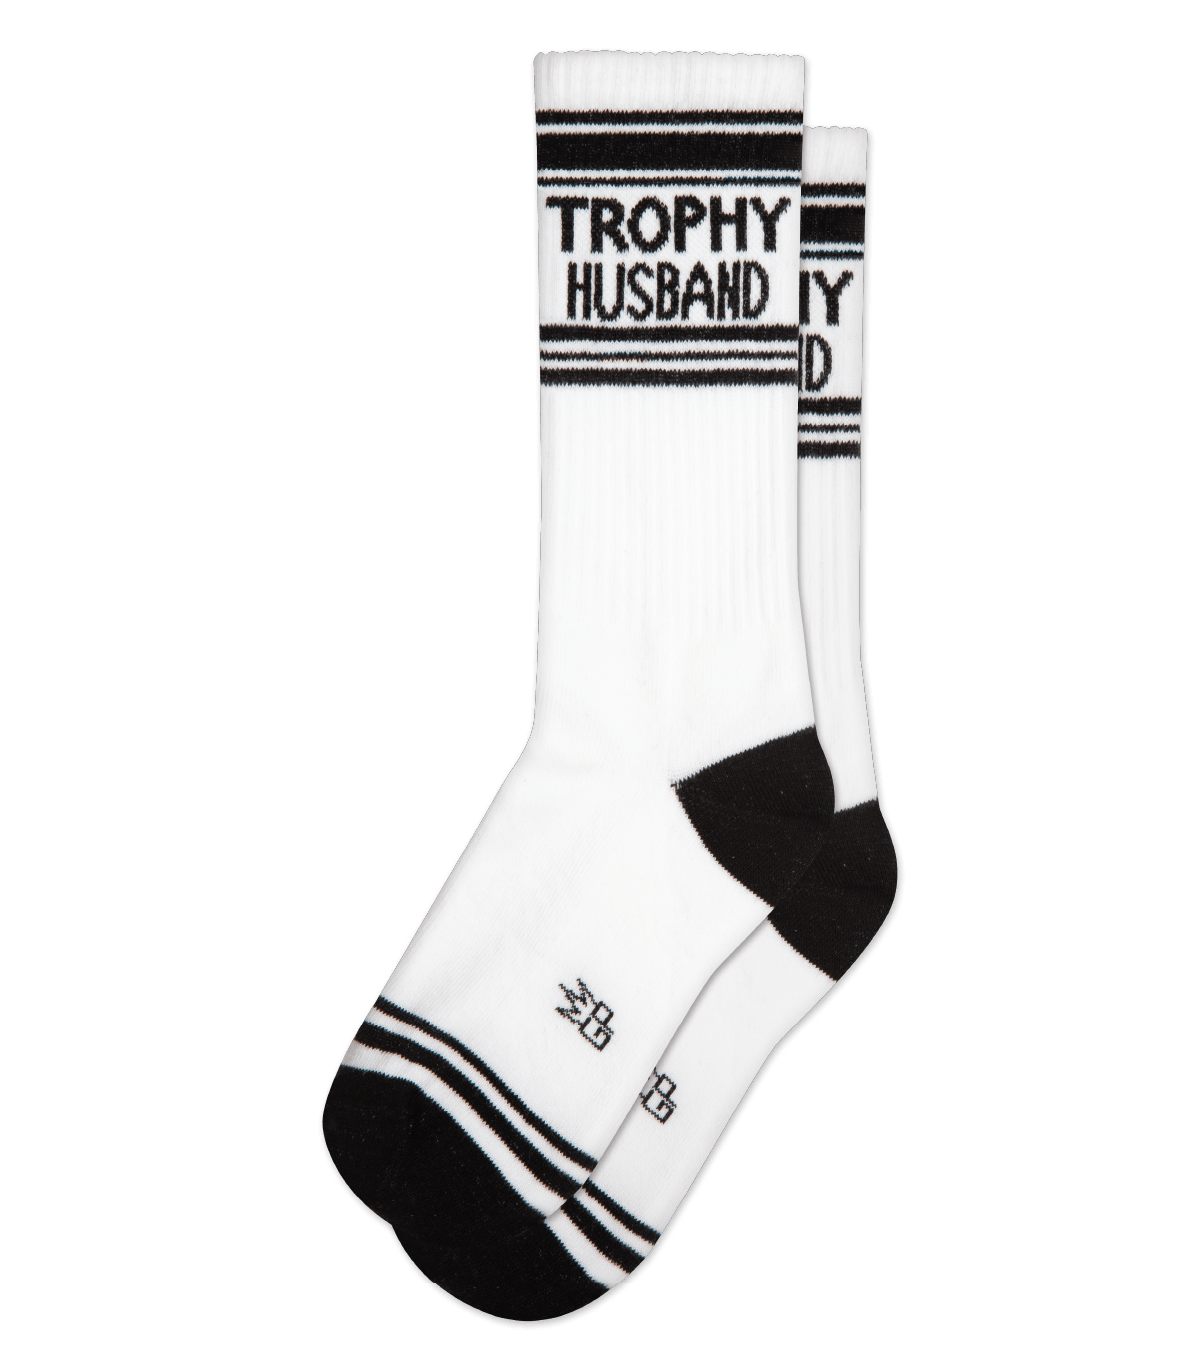 Shown in a flatlay, a pair of Gumball Poodle, white cotton crew socks with black heel/toe/accent stripes and “Trophy Husband” text